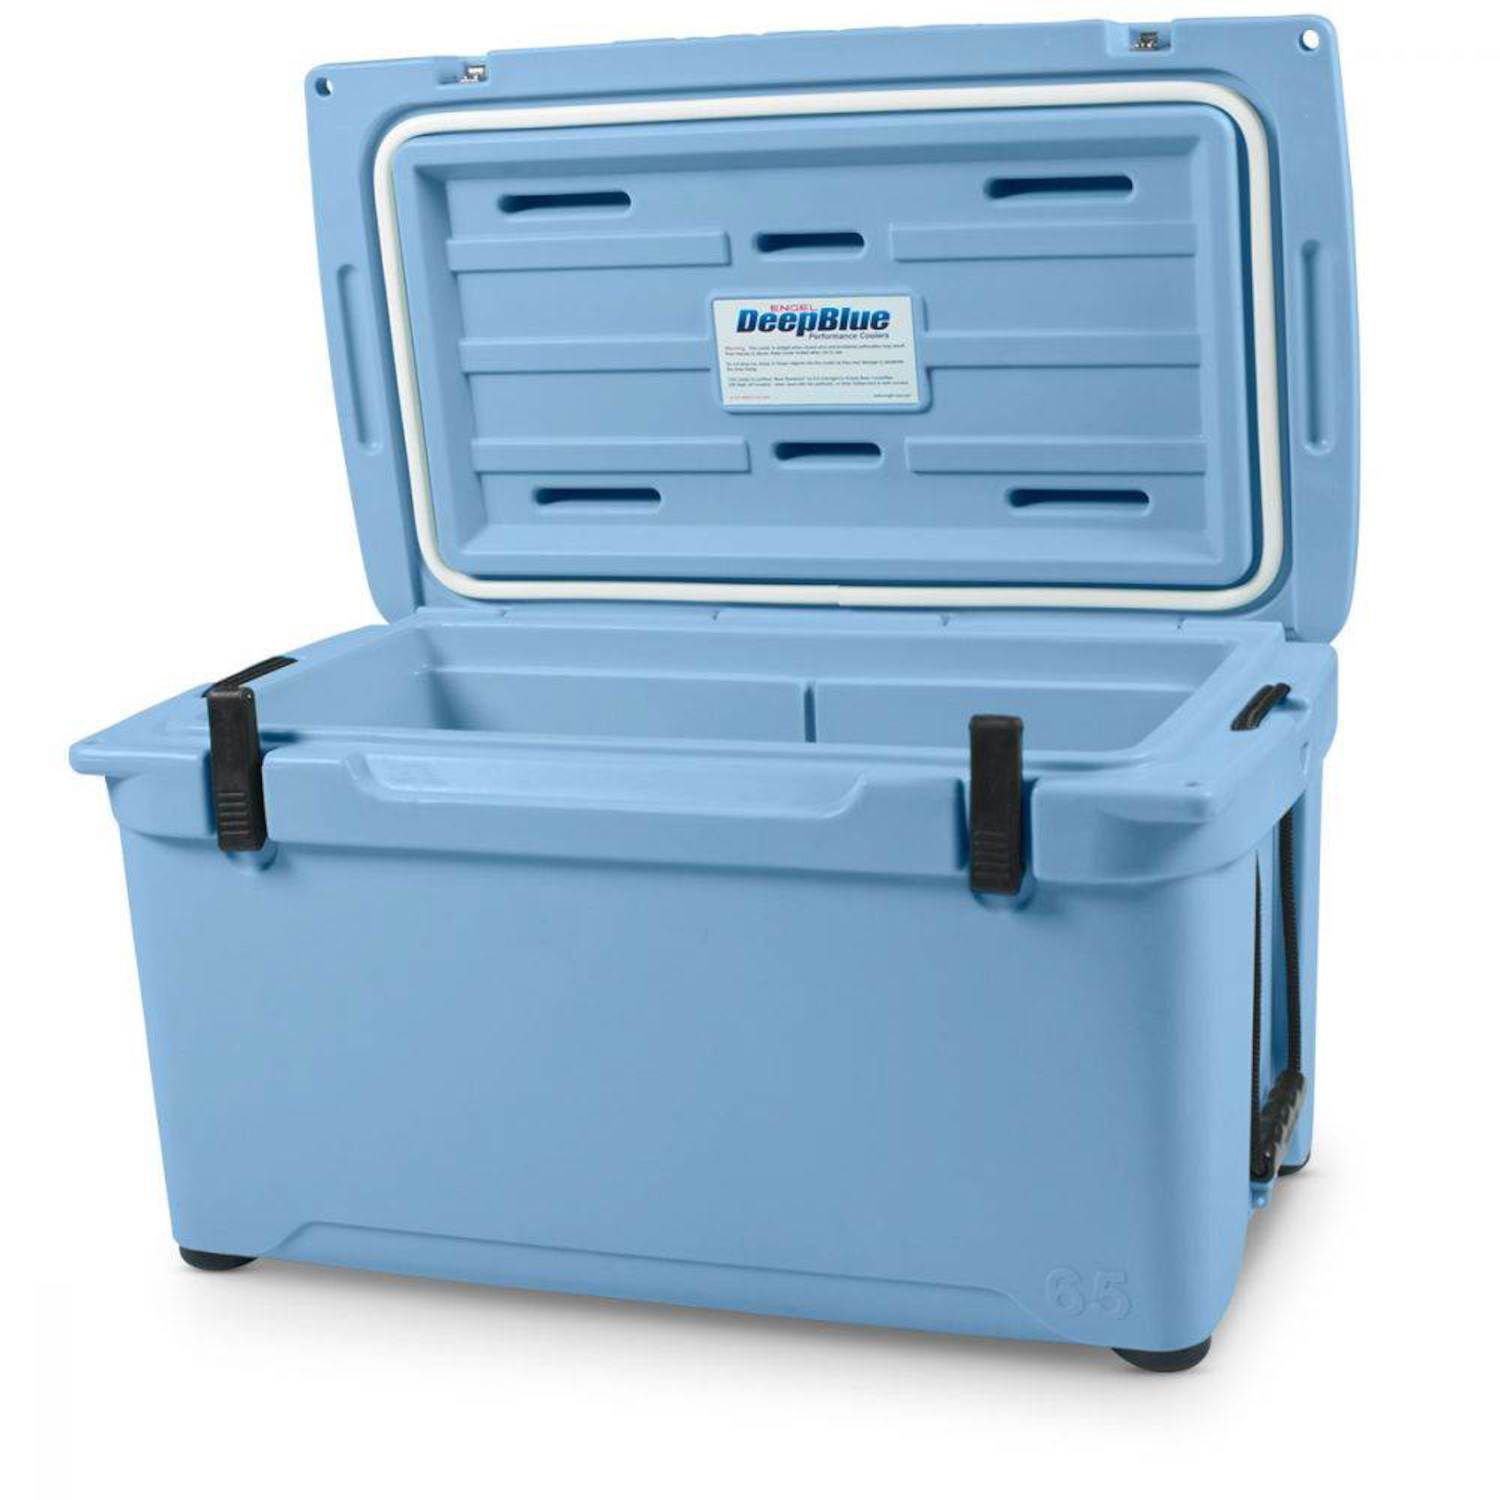 ENGEL 13 Quart Compact Durable Ultimate Leak Proof Outdoor Dry Box